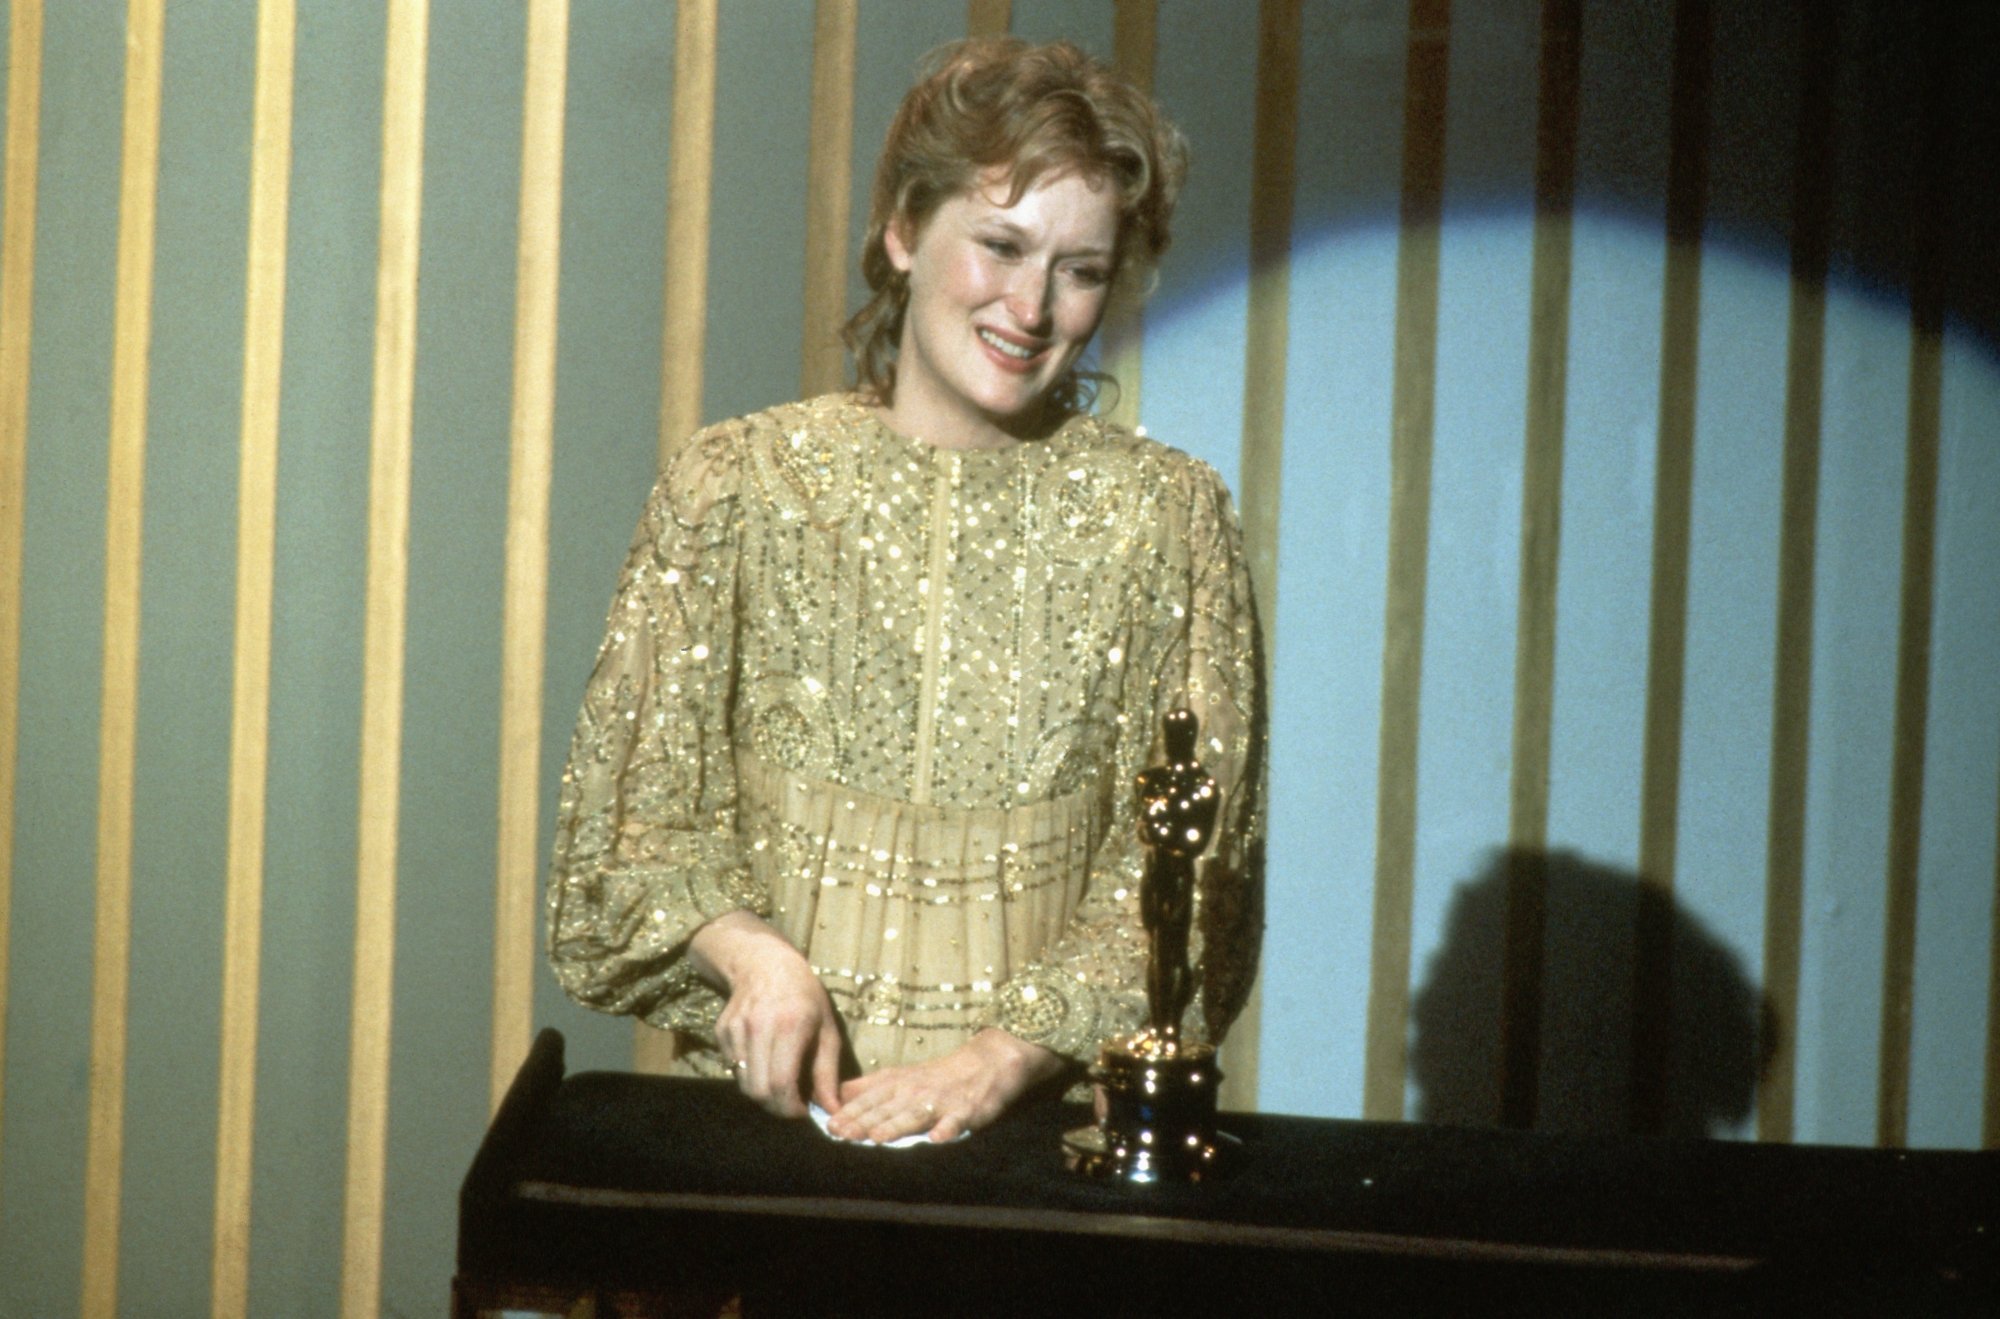 'Sophie's Choice' actor Meryl Streep wearing a gold dress, smiling, with her Oscar statue in front of her